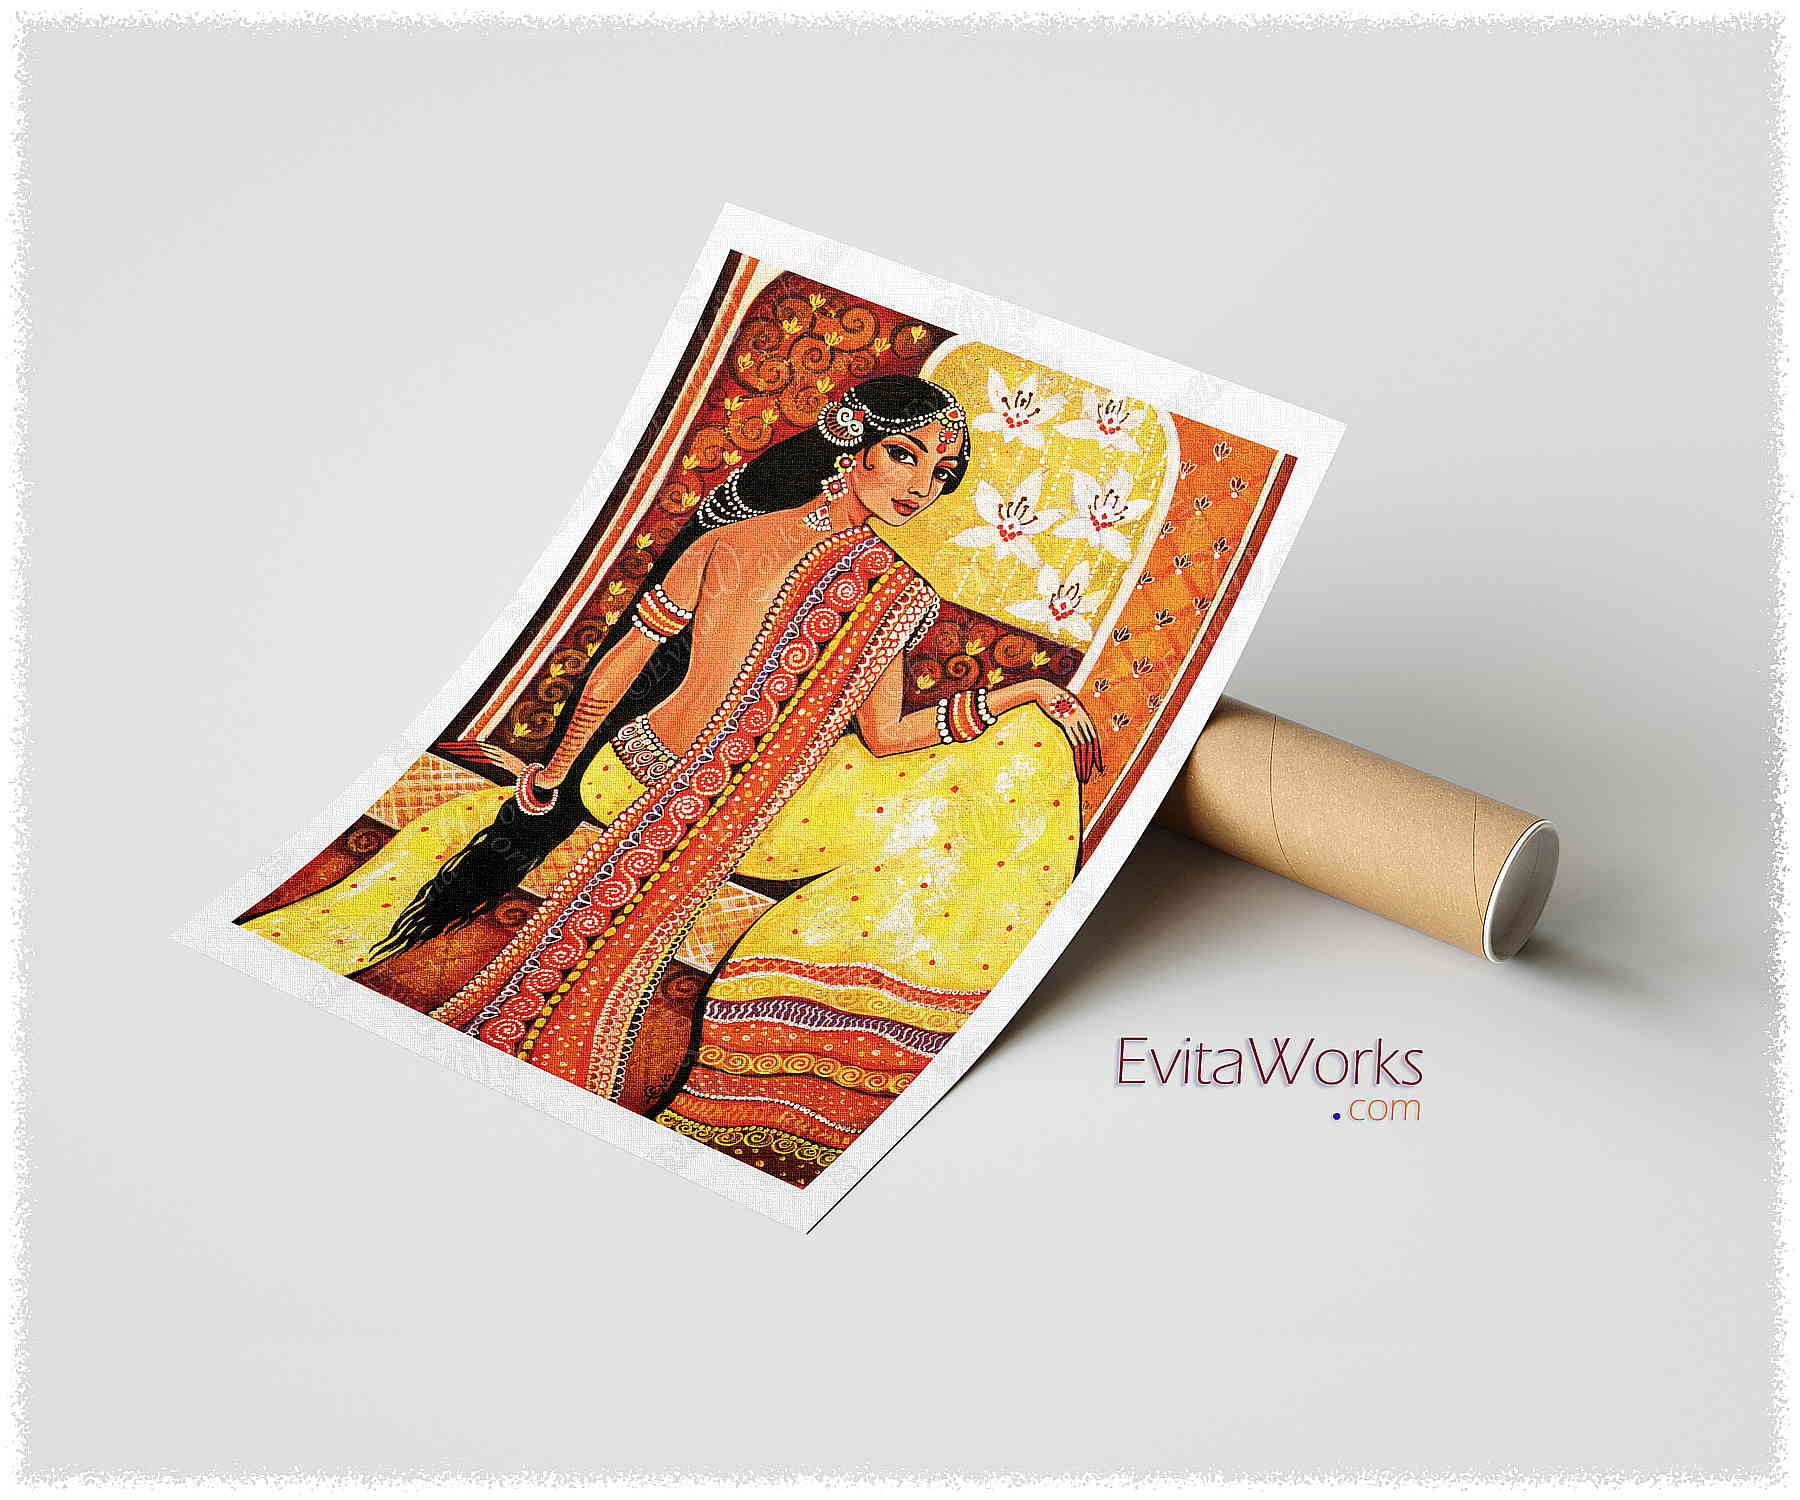 Hit to learn about "Bharat, Indian woman art" on prints